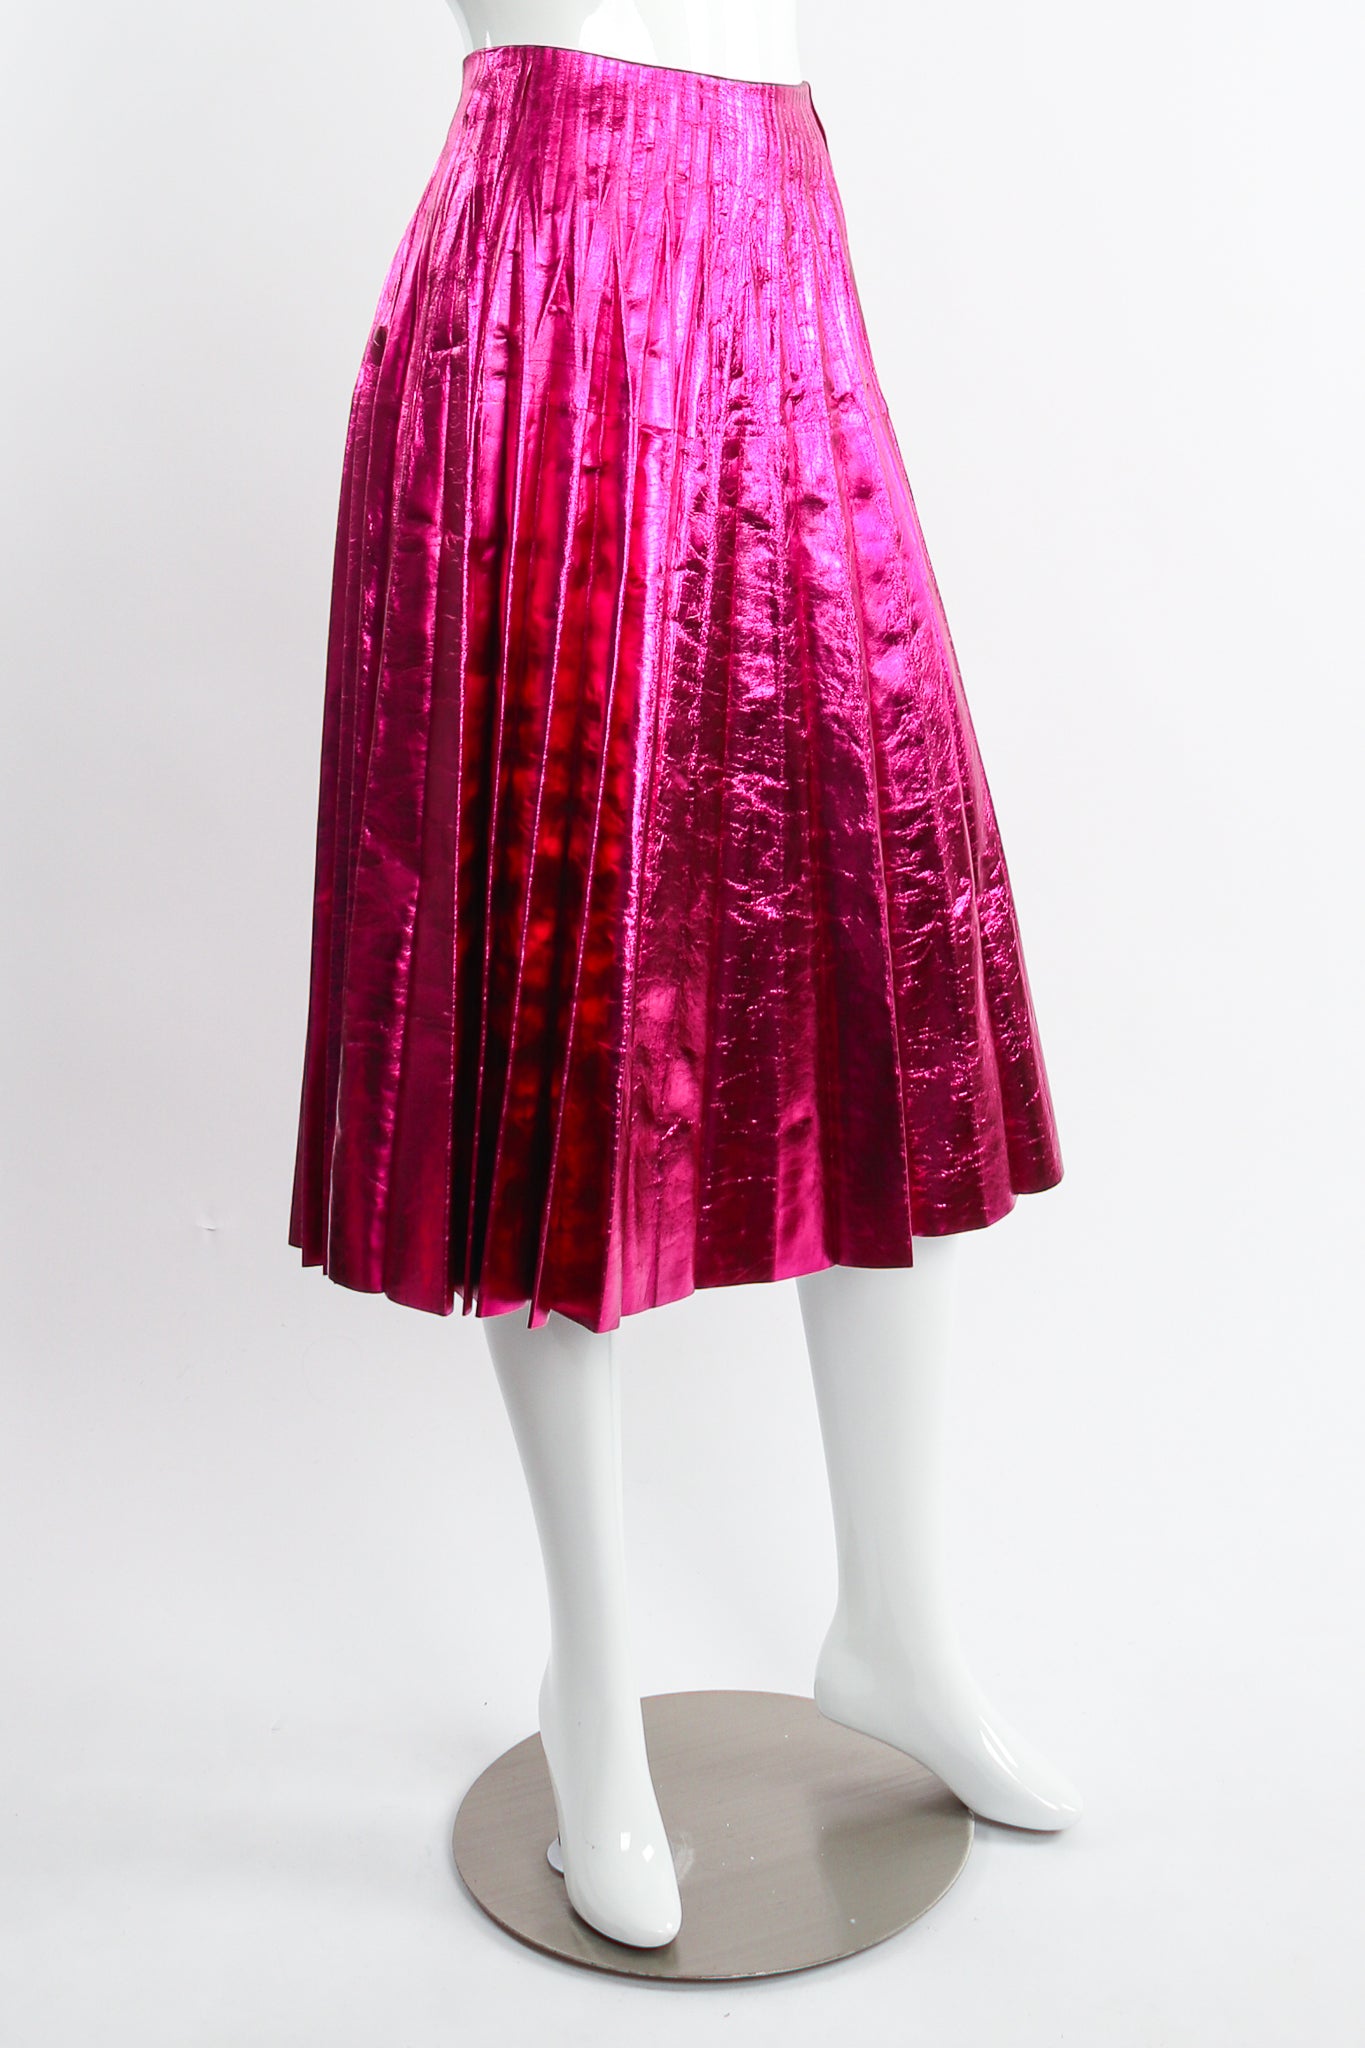 Gucci 2017 Metallic Plisse Pleated Leather Skirt in Fuchsia Rose on Mannequin angle at Recess LA